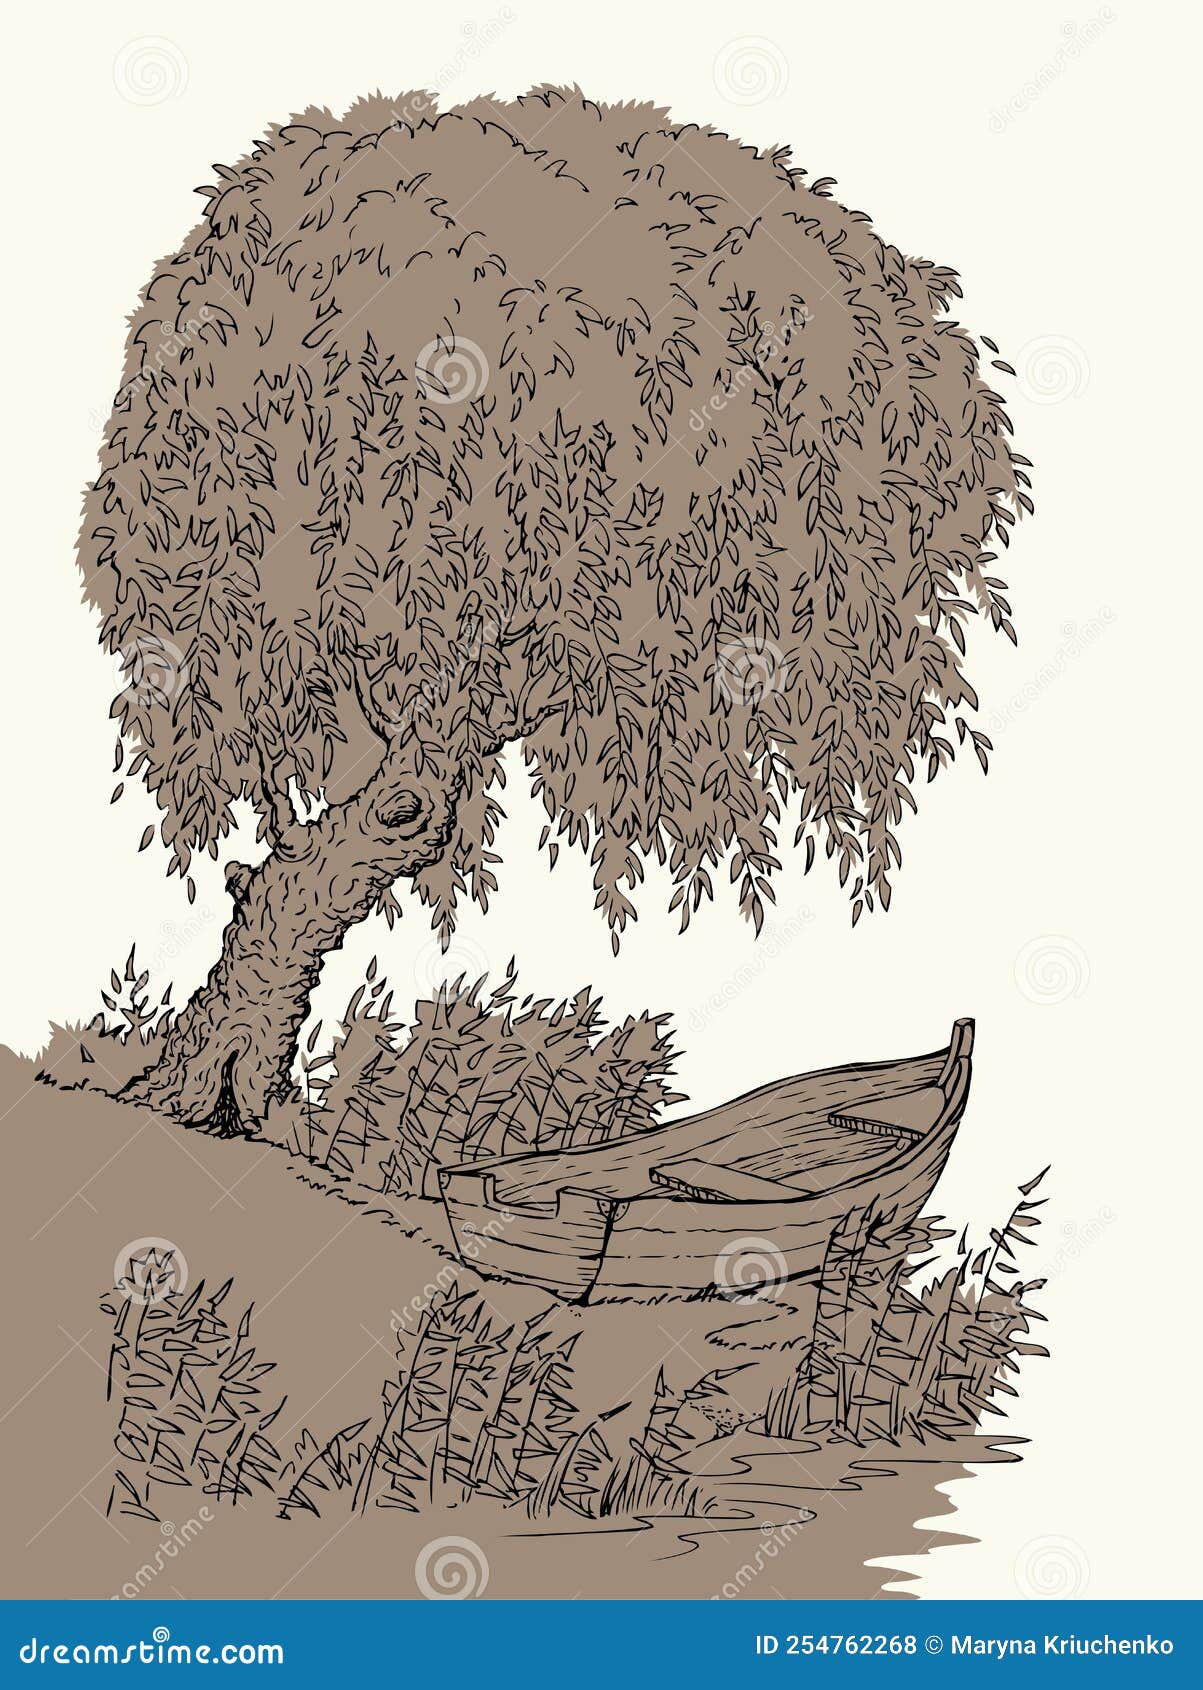 Vector Drawing. Old Boat on the Lake Under the Branches of a Willow Stock  Vector - Illustration of coast, fishing: 254762268